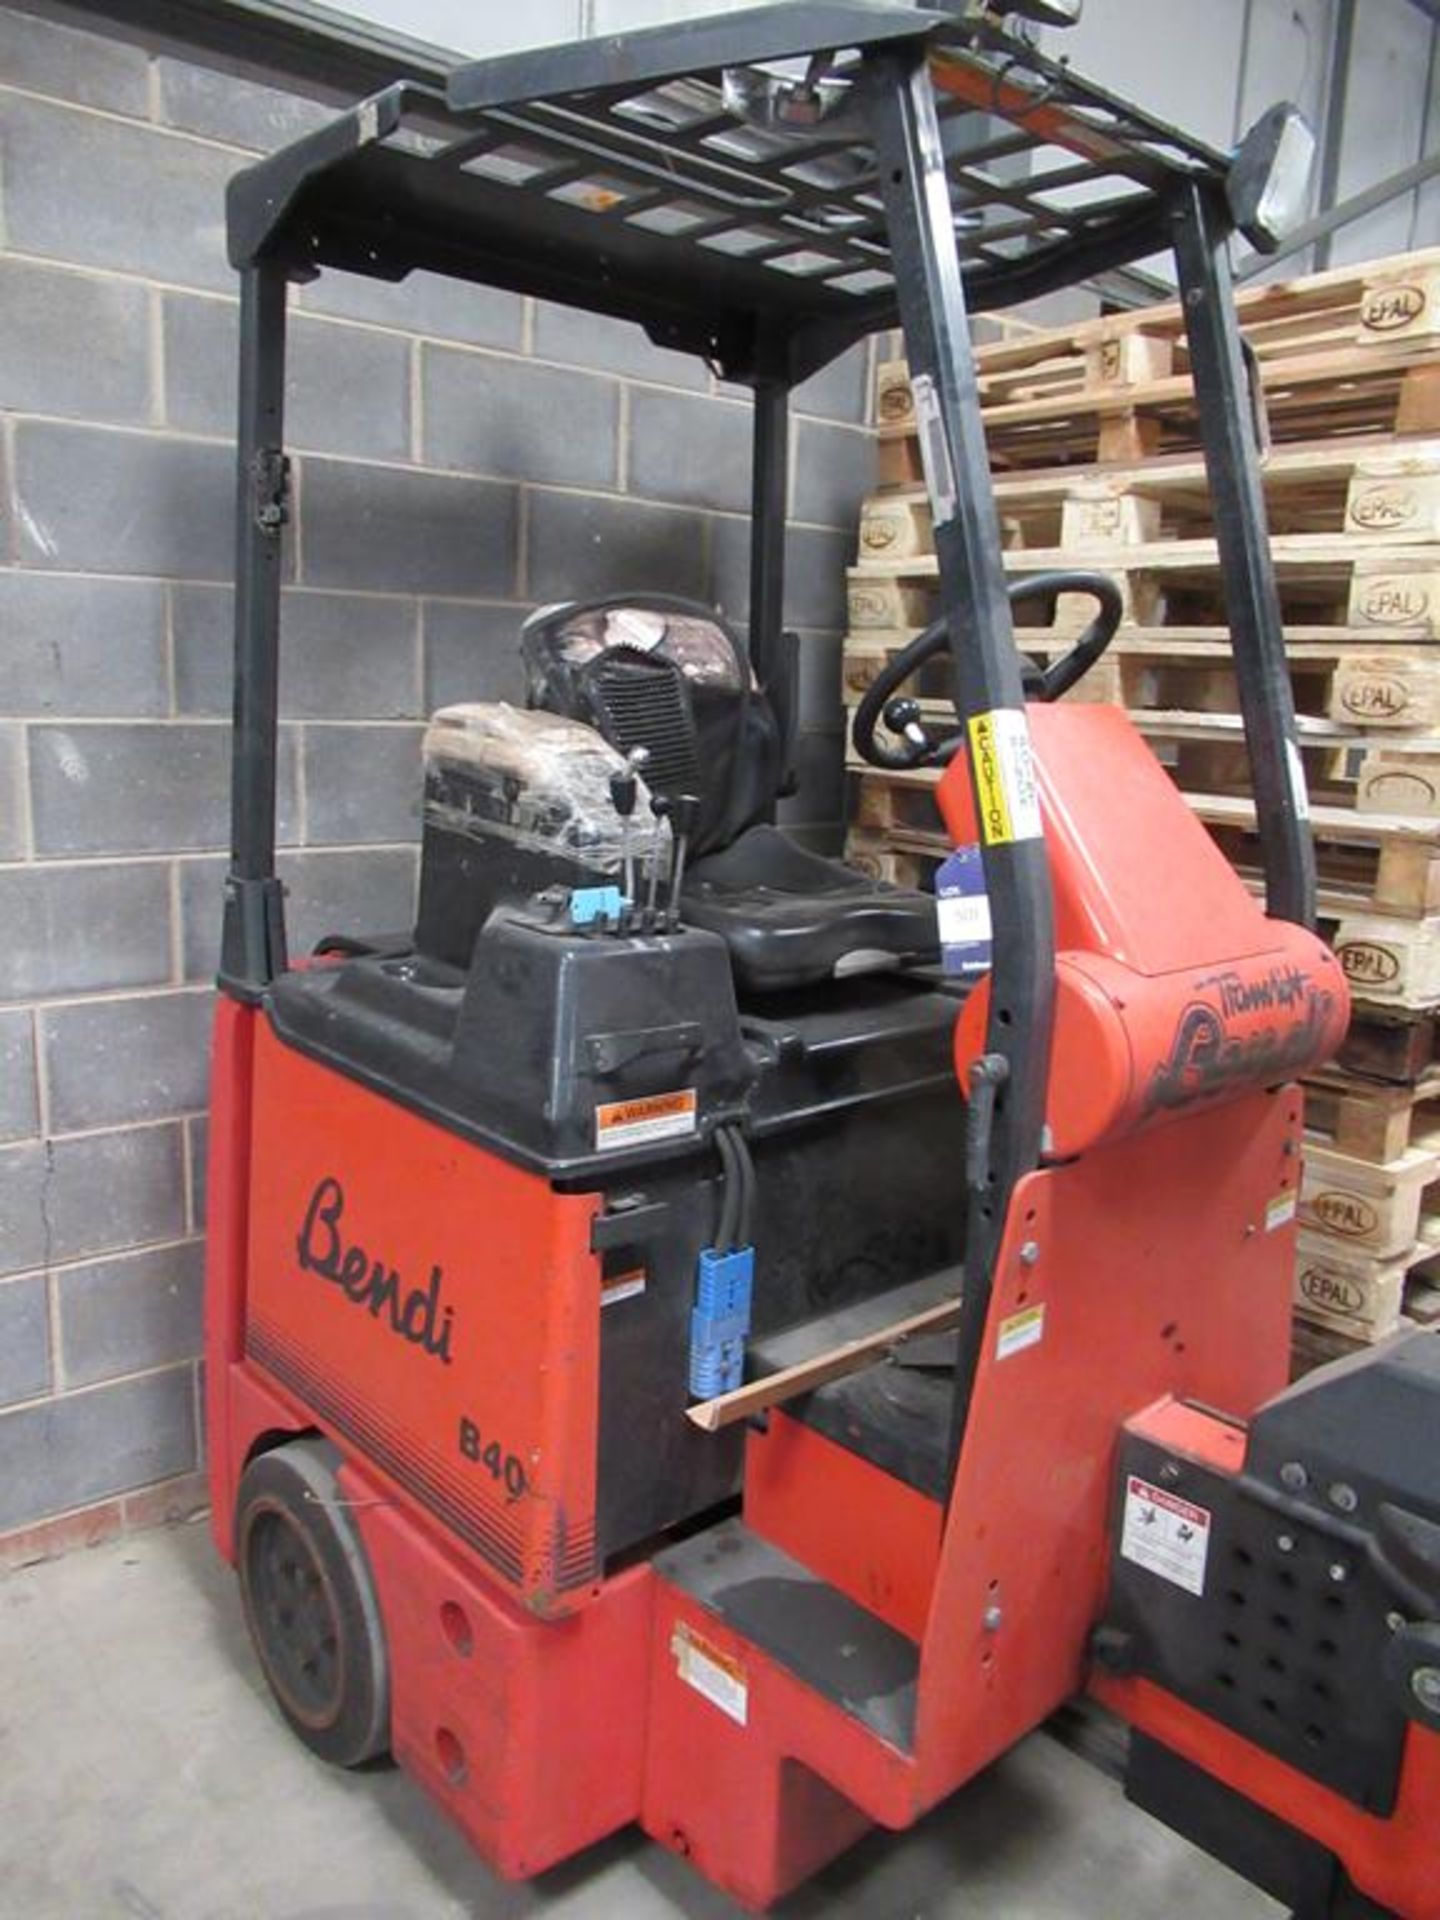 Trans lift Bendi B40 Articulated Fork Lift Truck (Does not Run) and a Chloride Motive Power 21 Ove - Image 5 of 11